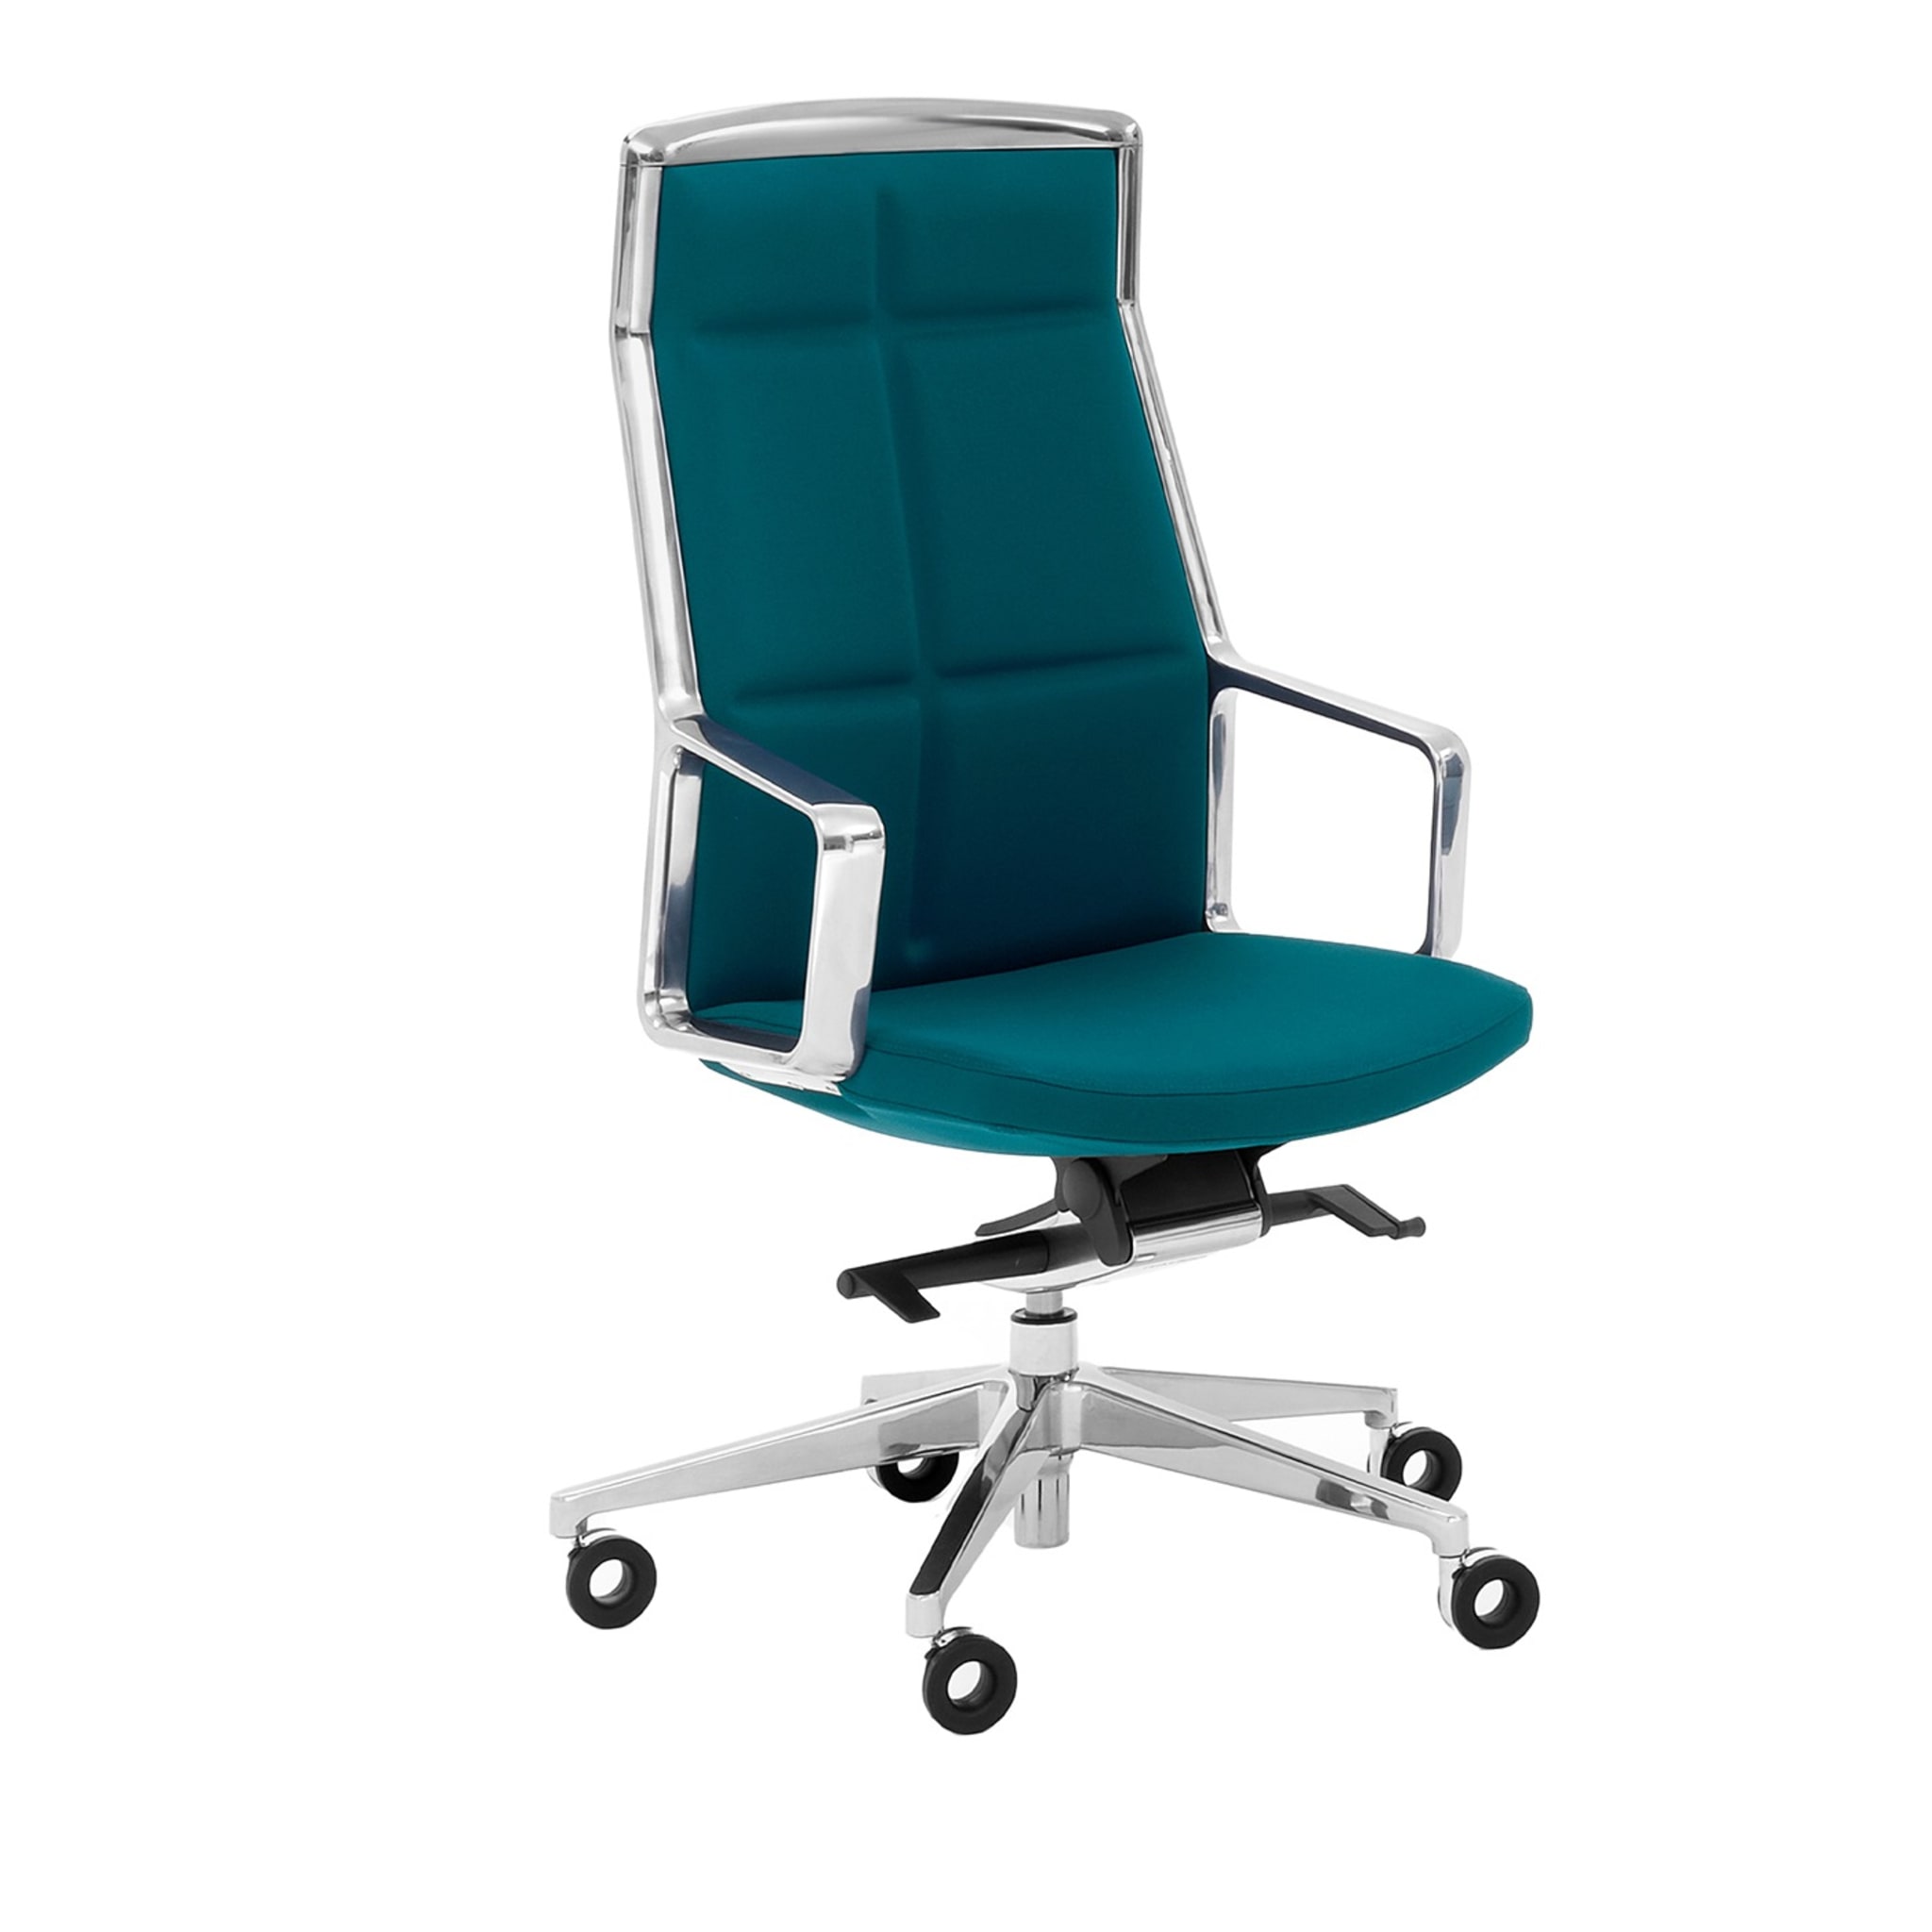 ADELE BLUE-GREEN EXECUTIVE CHAIR by ORLANDINIDESIGN - Main view